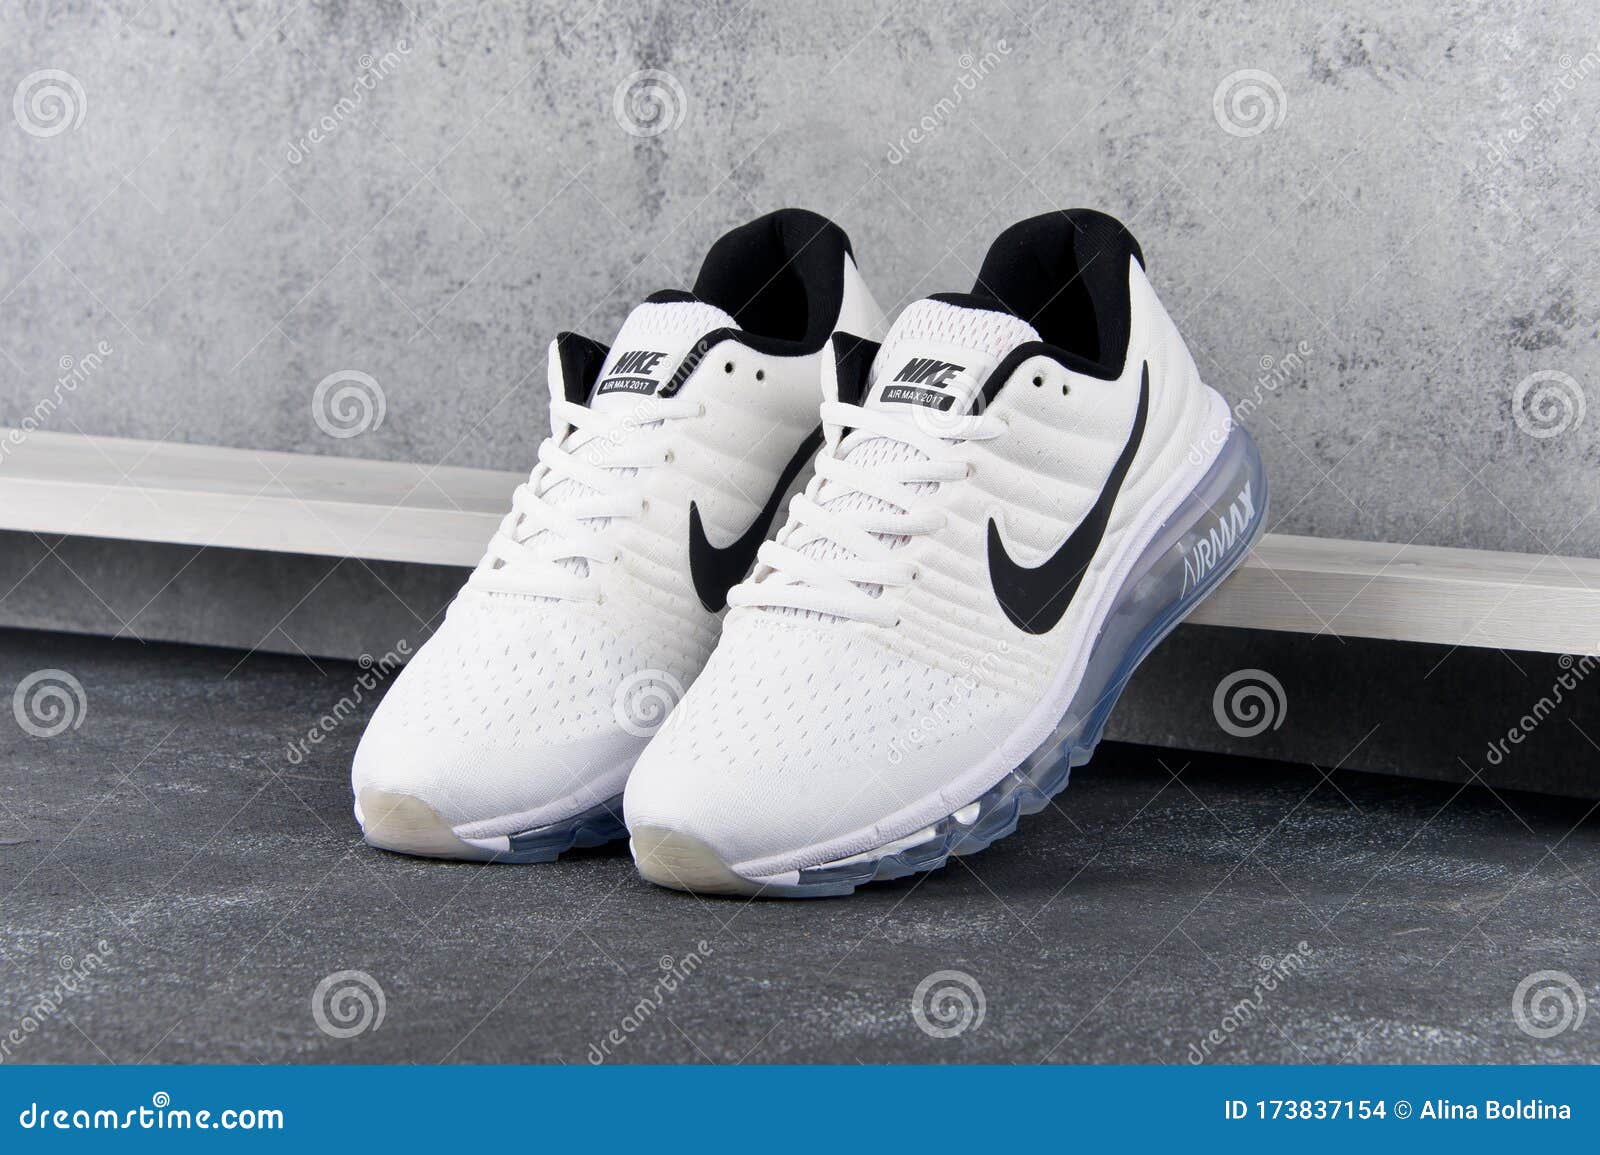 White Nike Air Max 2017 Running Shoes, Sneakers Shot on Grey Abstract Background. Krasnoyarsk, Russia - May 12, 2017 Editorial Stock Image - Image of sneaker,